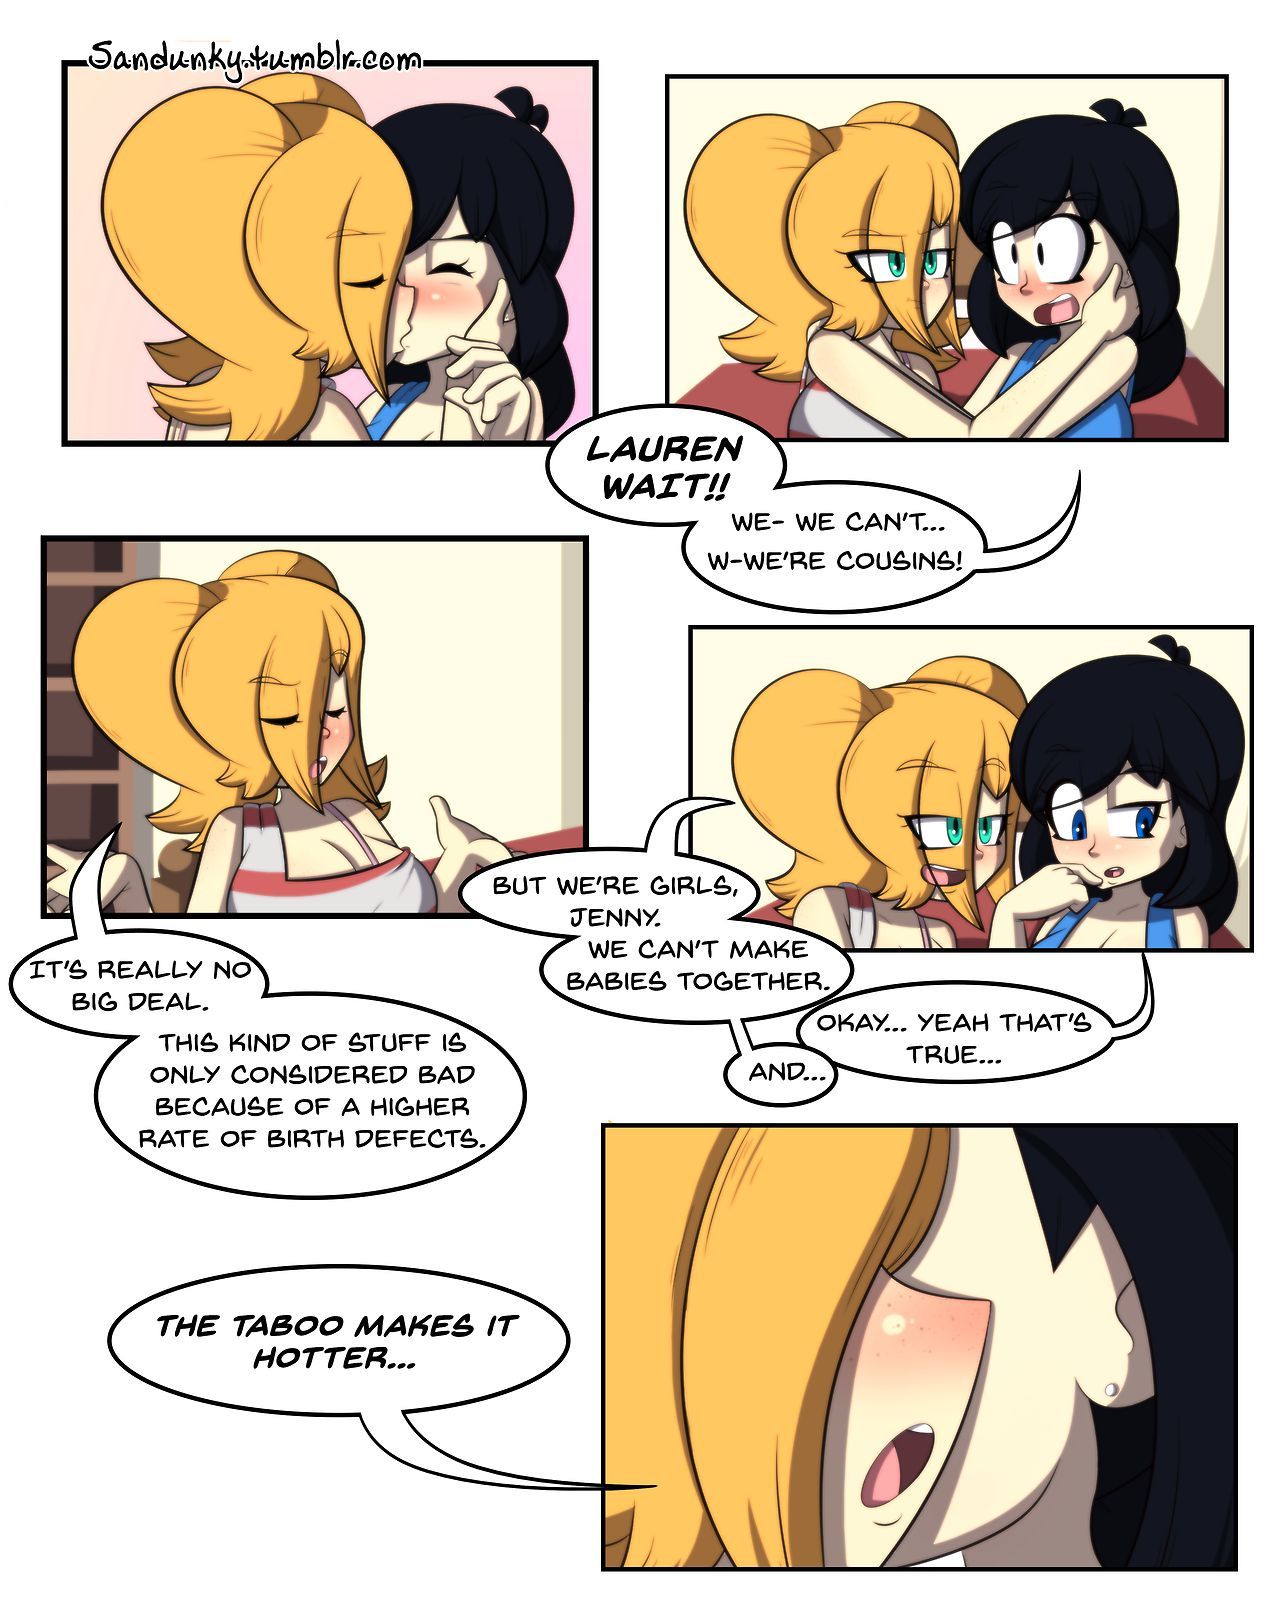 [Sandunky] Thicker than Water (Ongoing) 16